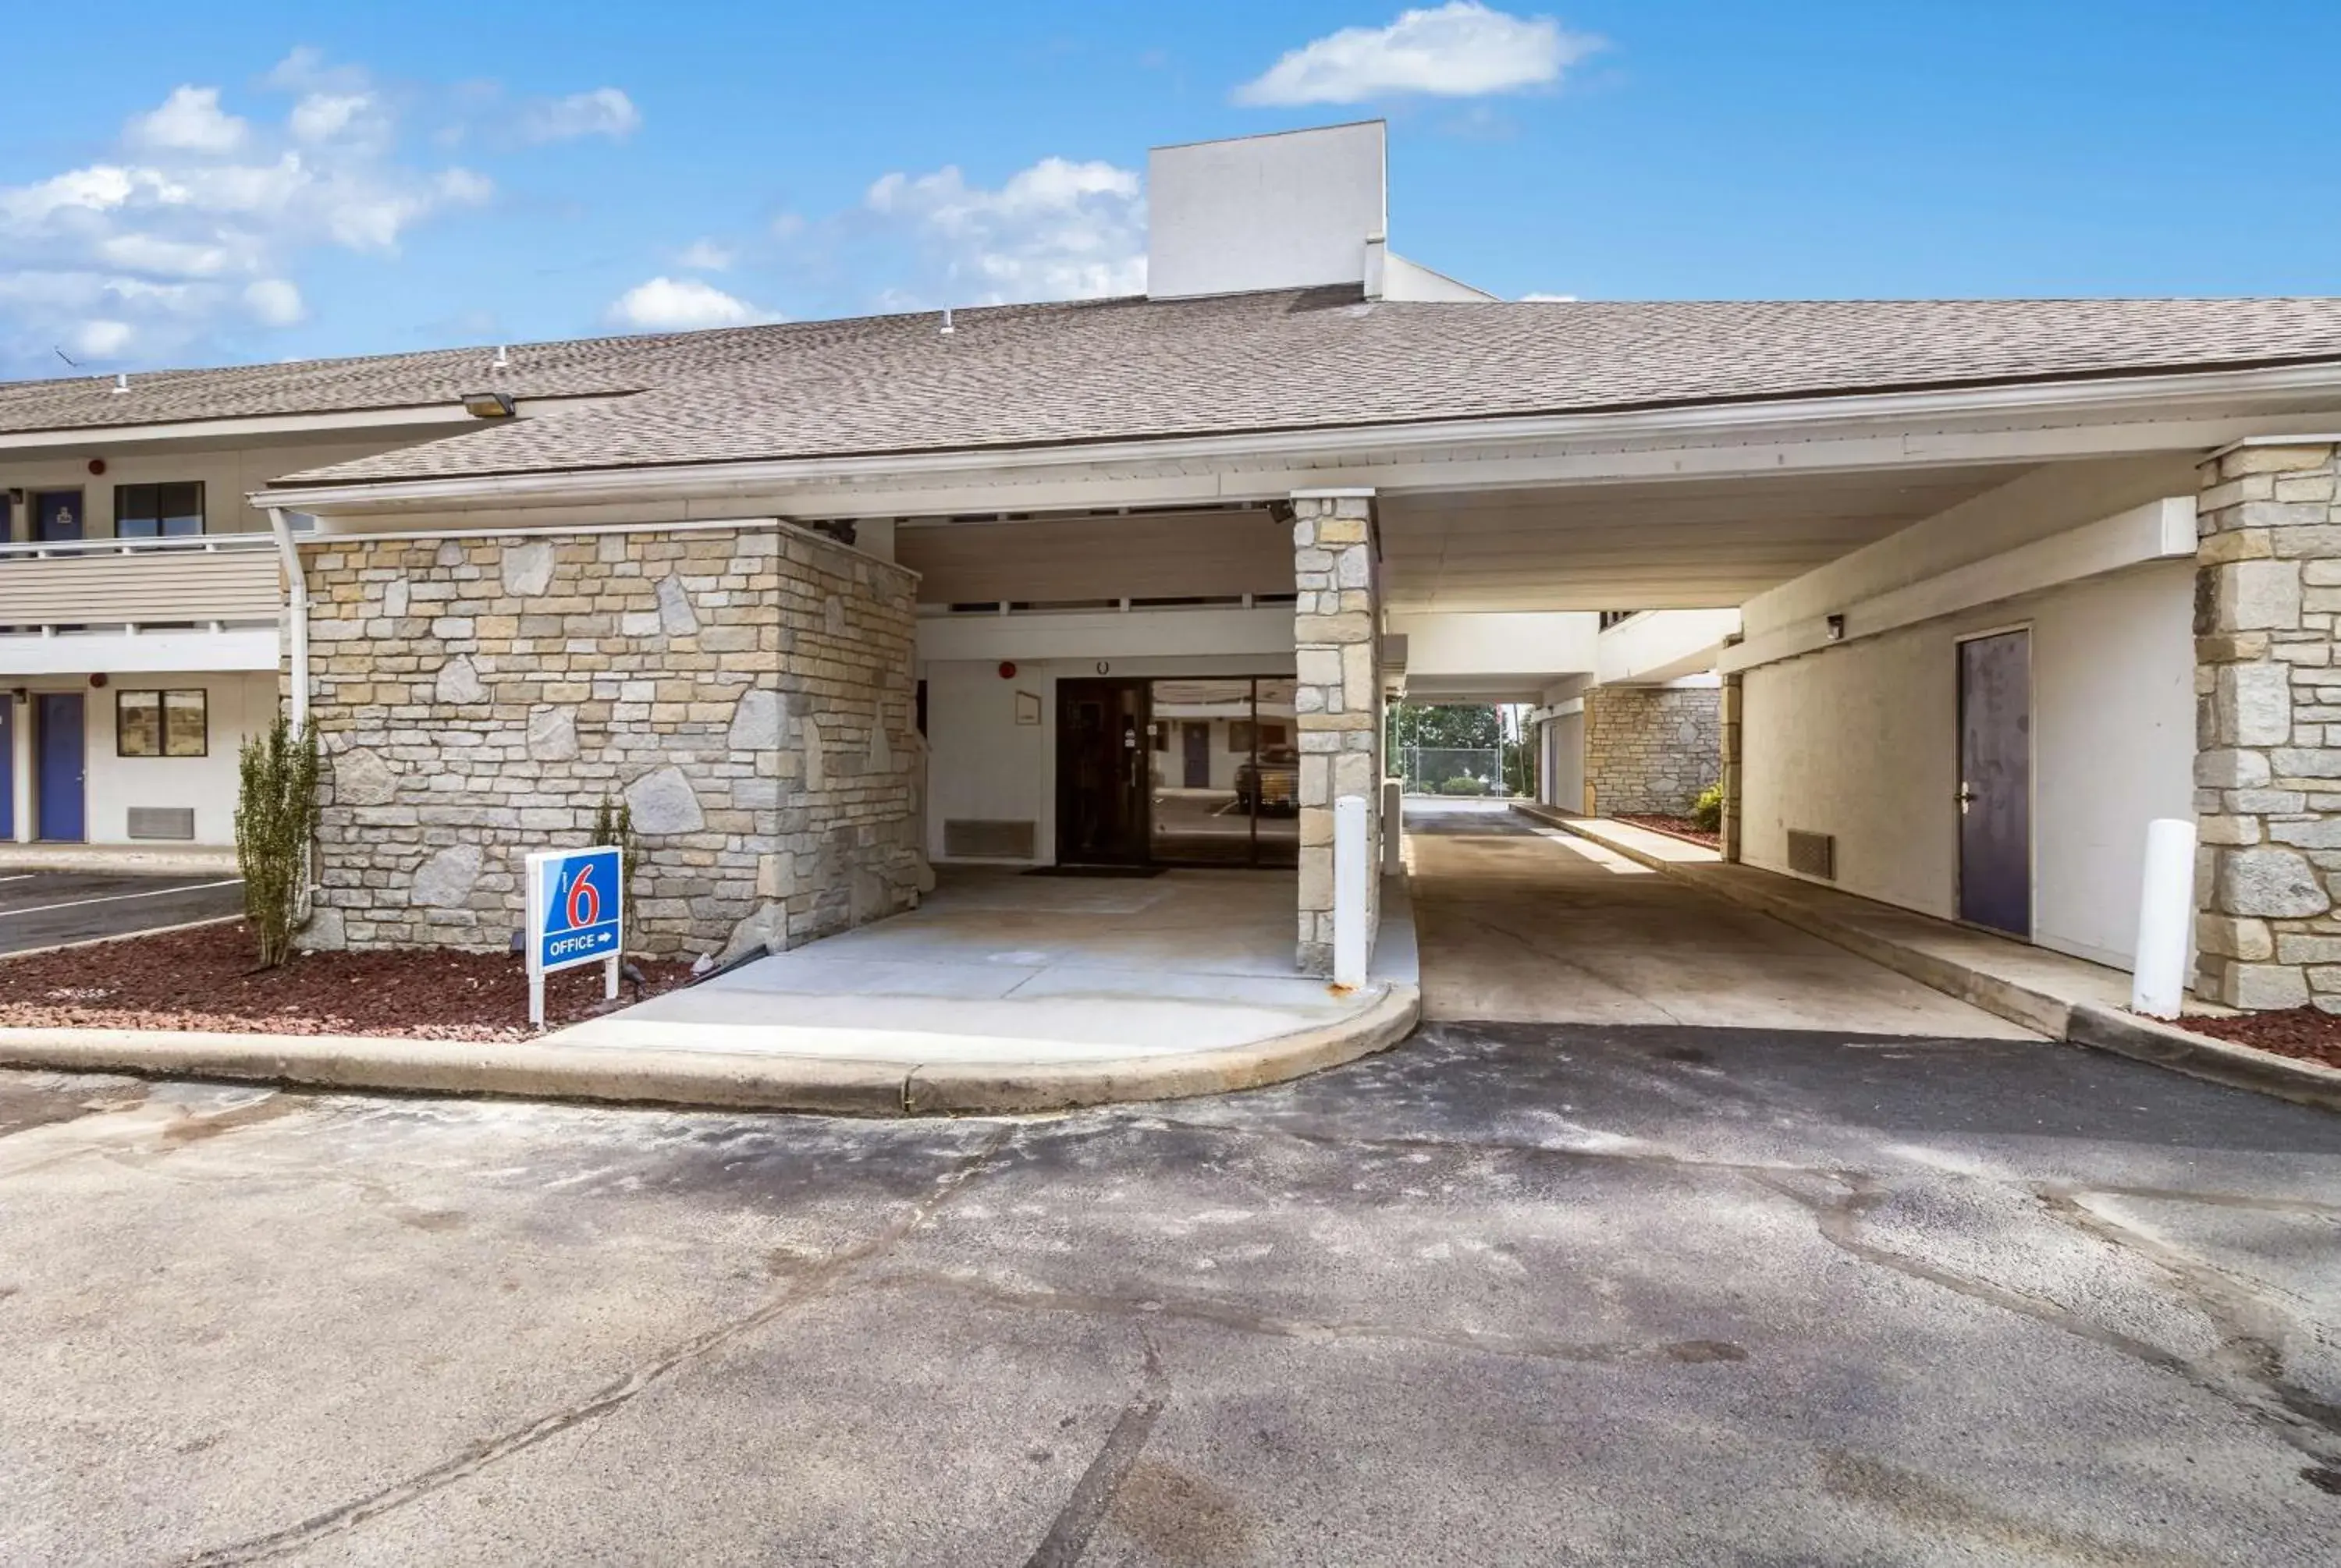 Property Building in Motel 6-Dayton, OH - Englewood